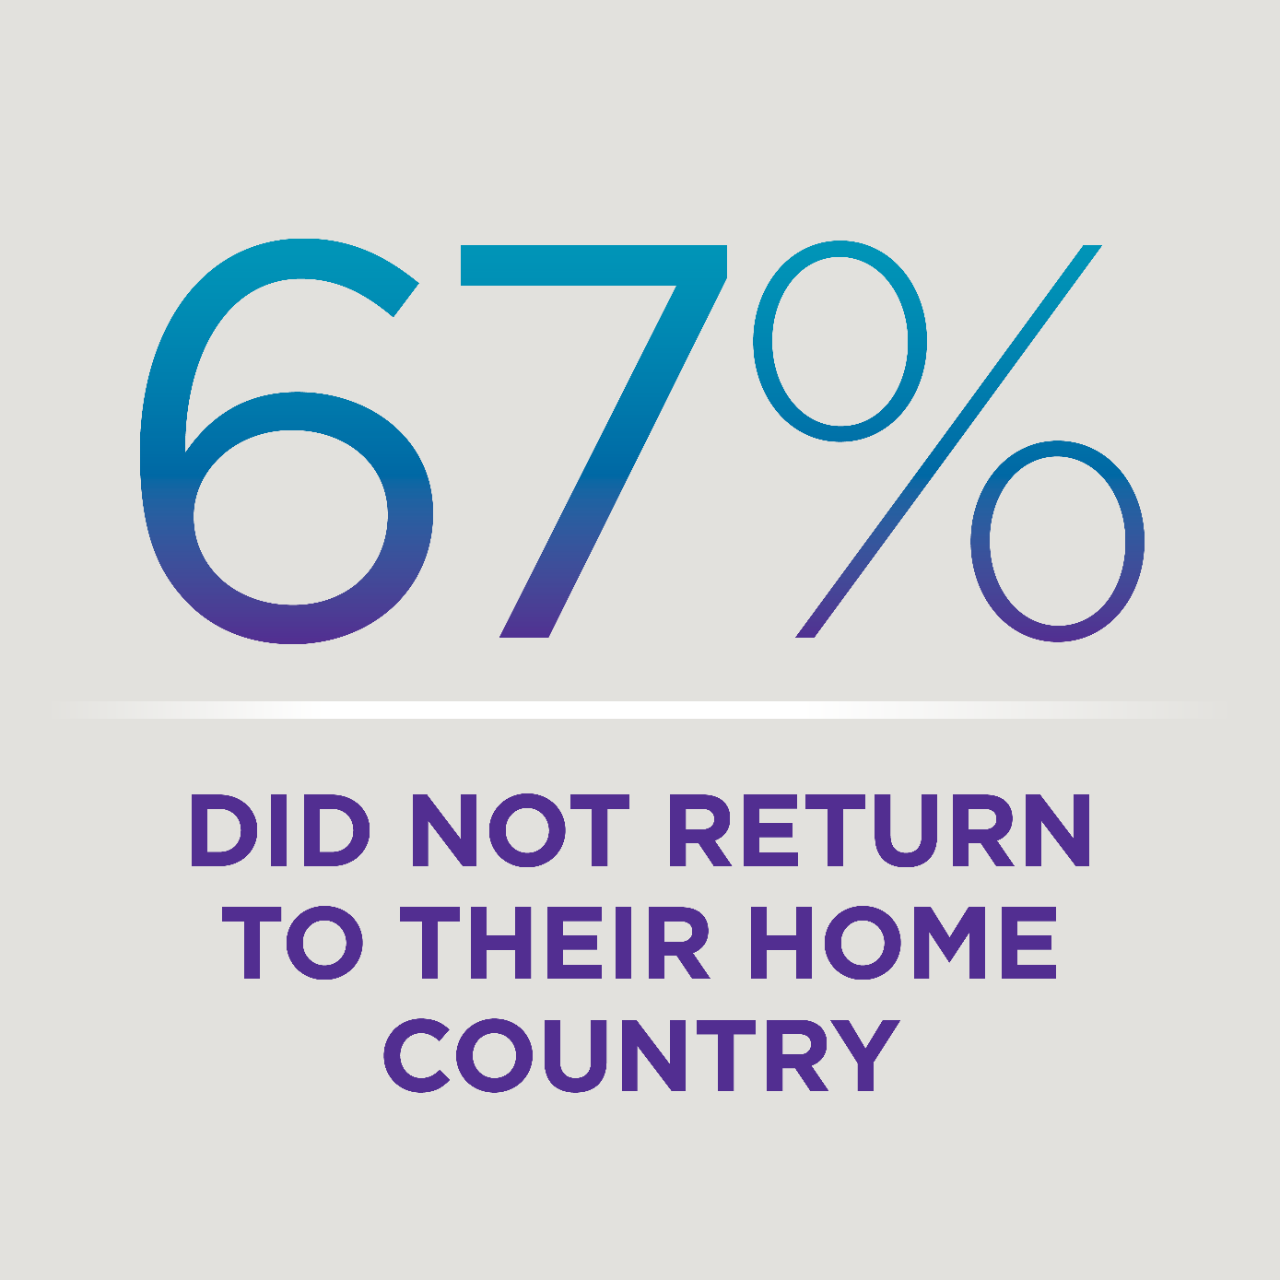 67% do not return to their home country.